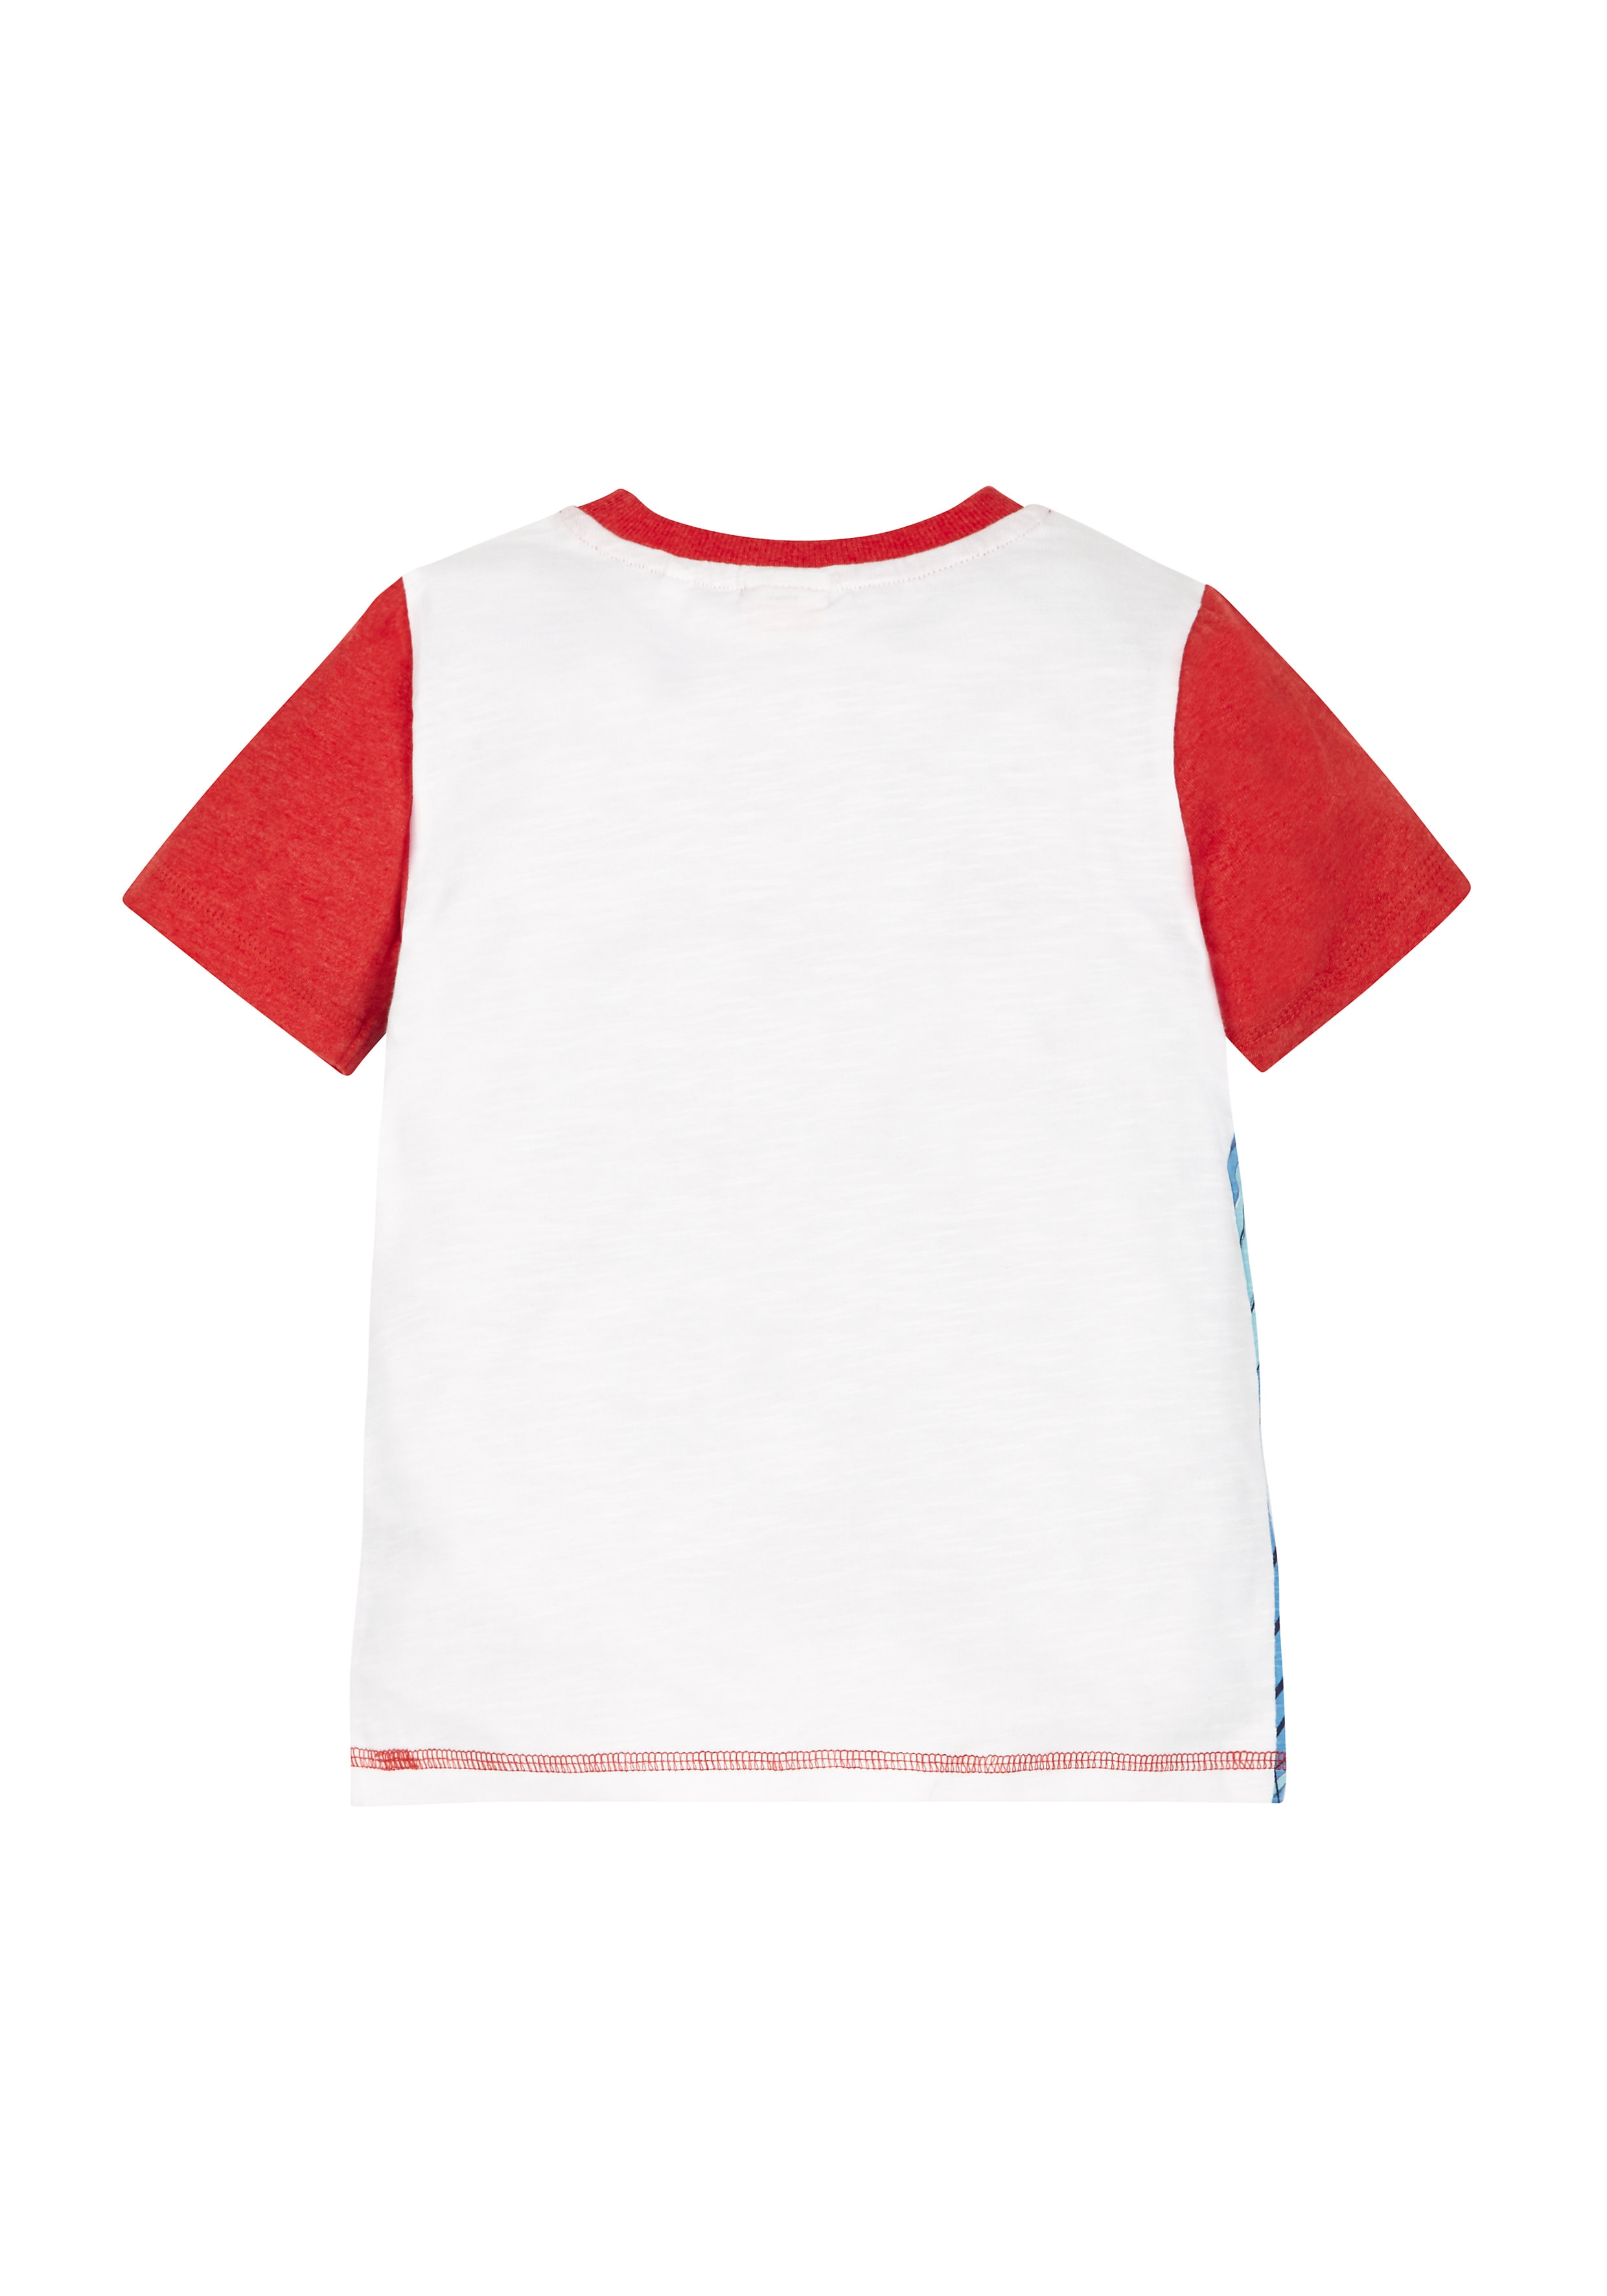 Mothercare | Boys Marvel Spiderman T-Shirt - Red 1